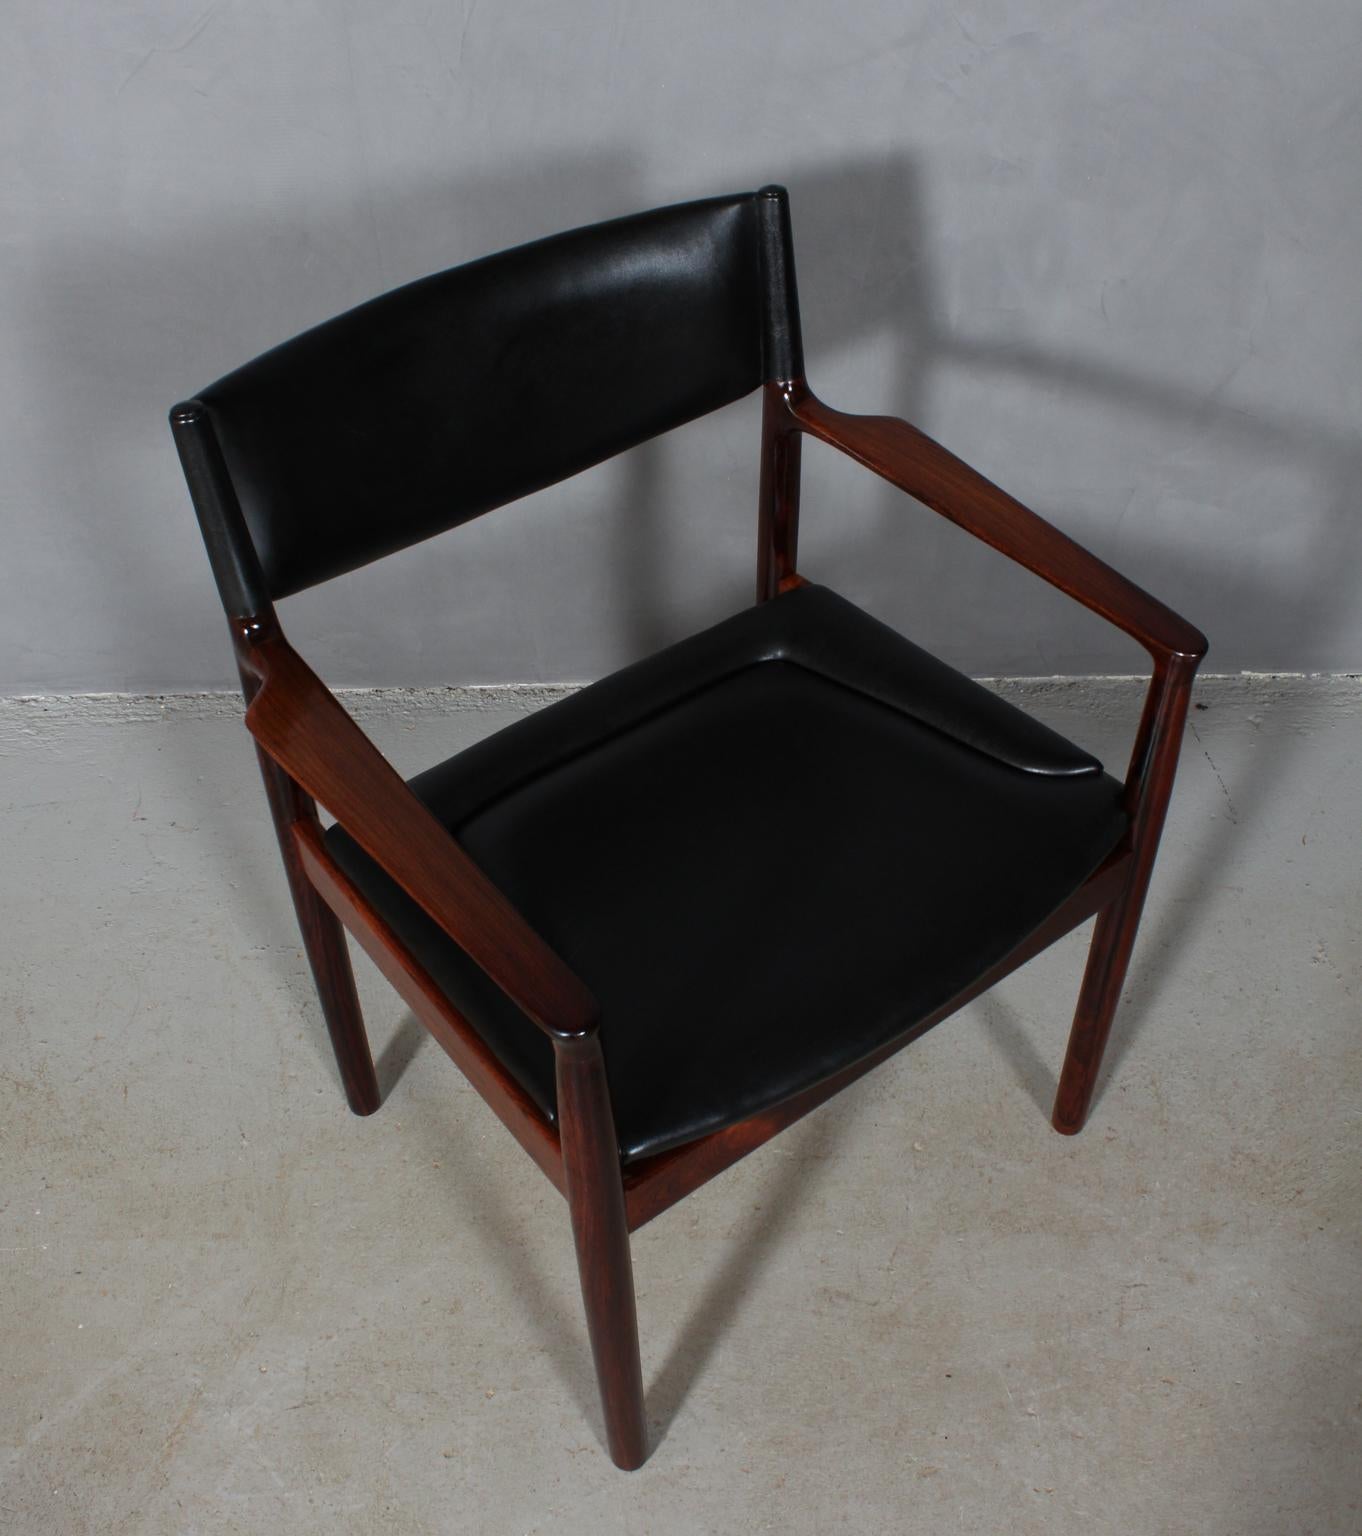 Erik Wørts armchair in solid rosewood.

Upholstered with black leather.

Model Erika, made by Vamo.